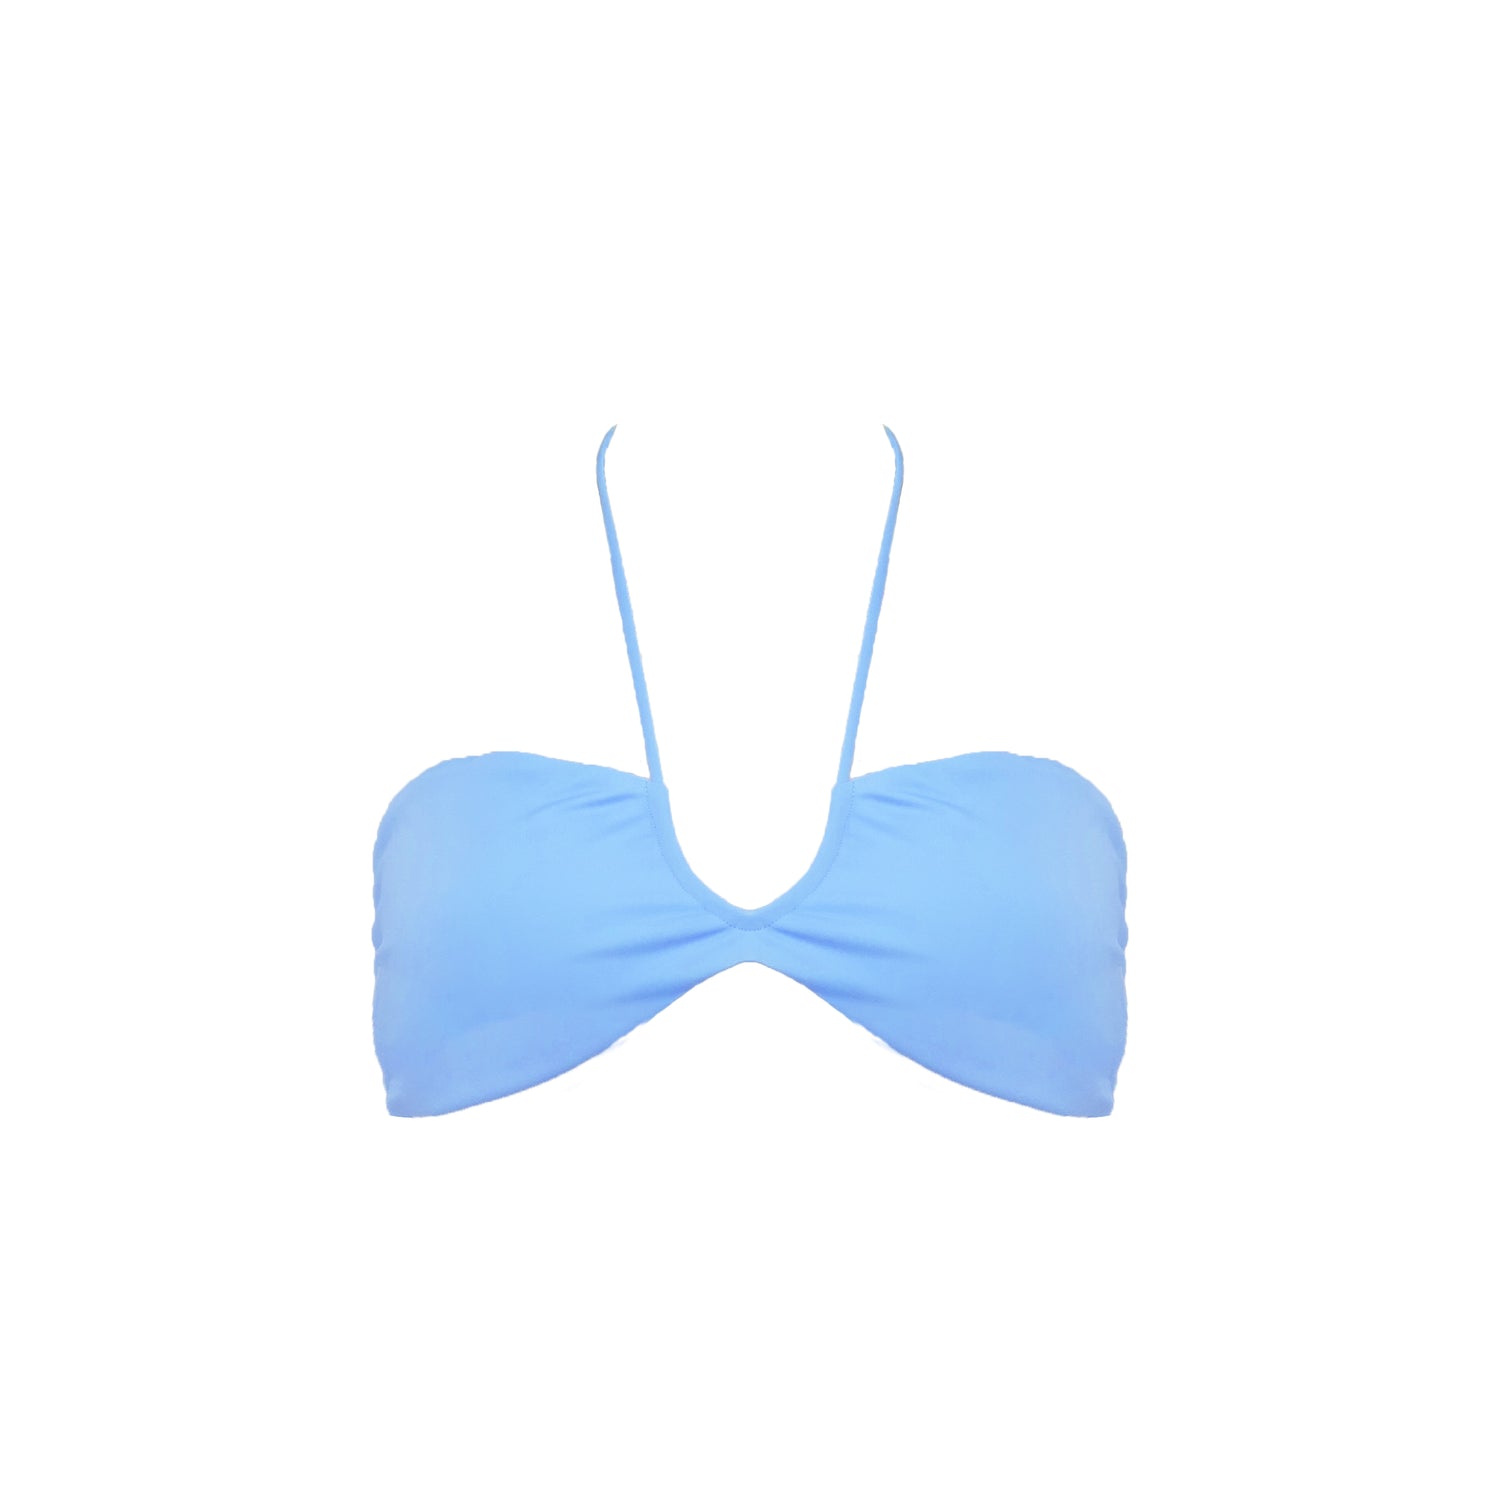 Periwinkle blue strapless bikini top with front halter strap and adjustable tie back.